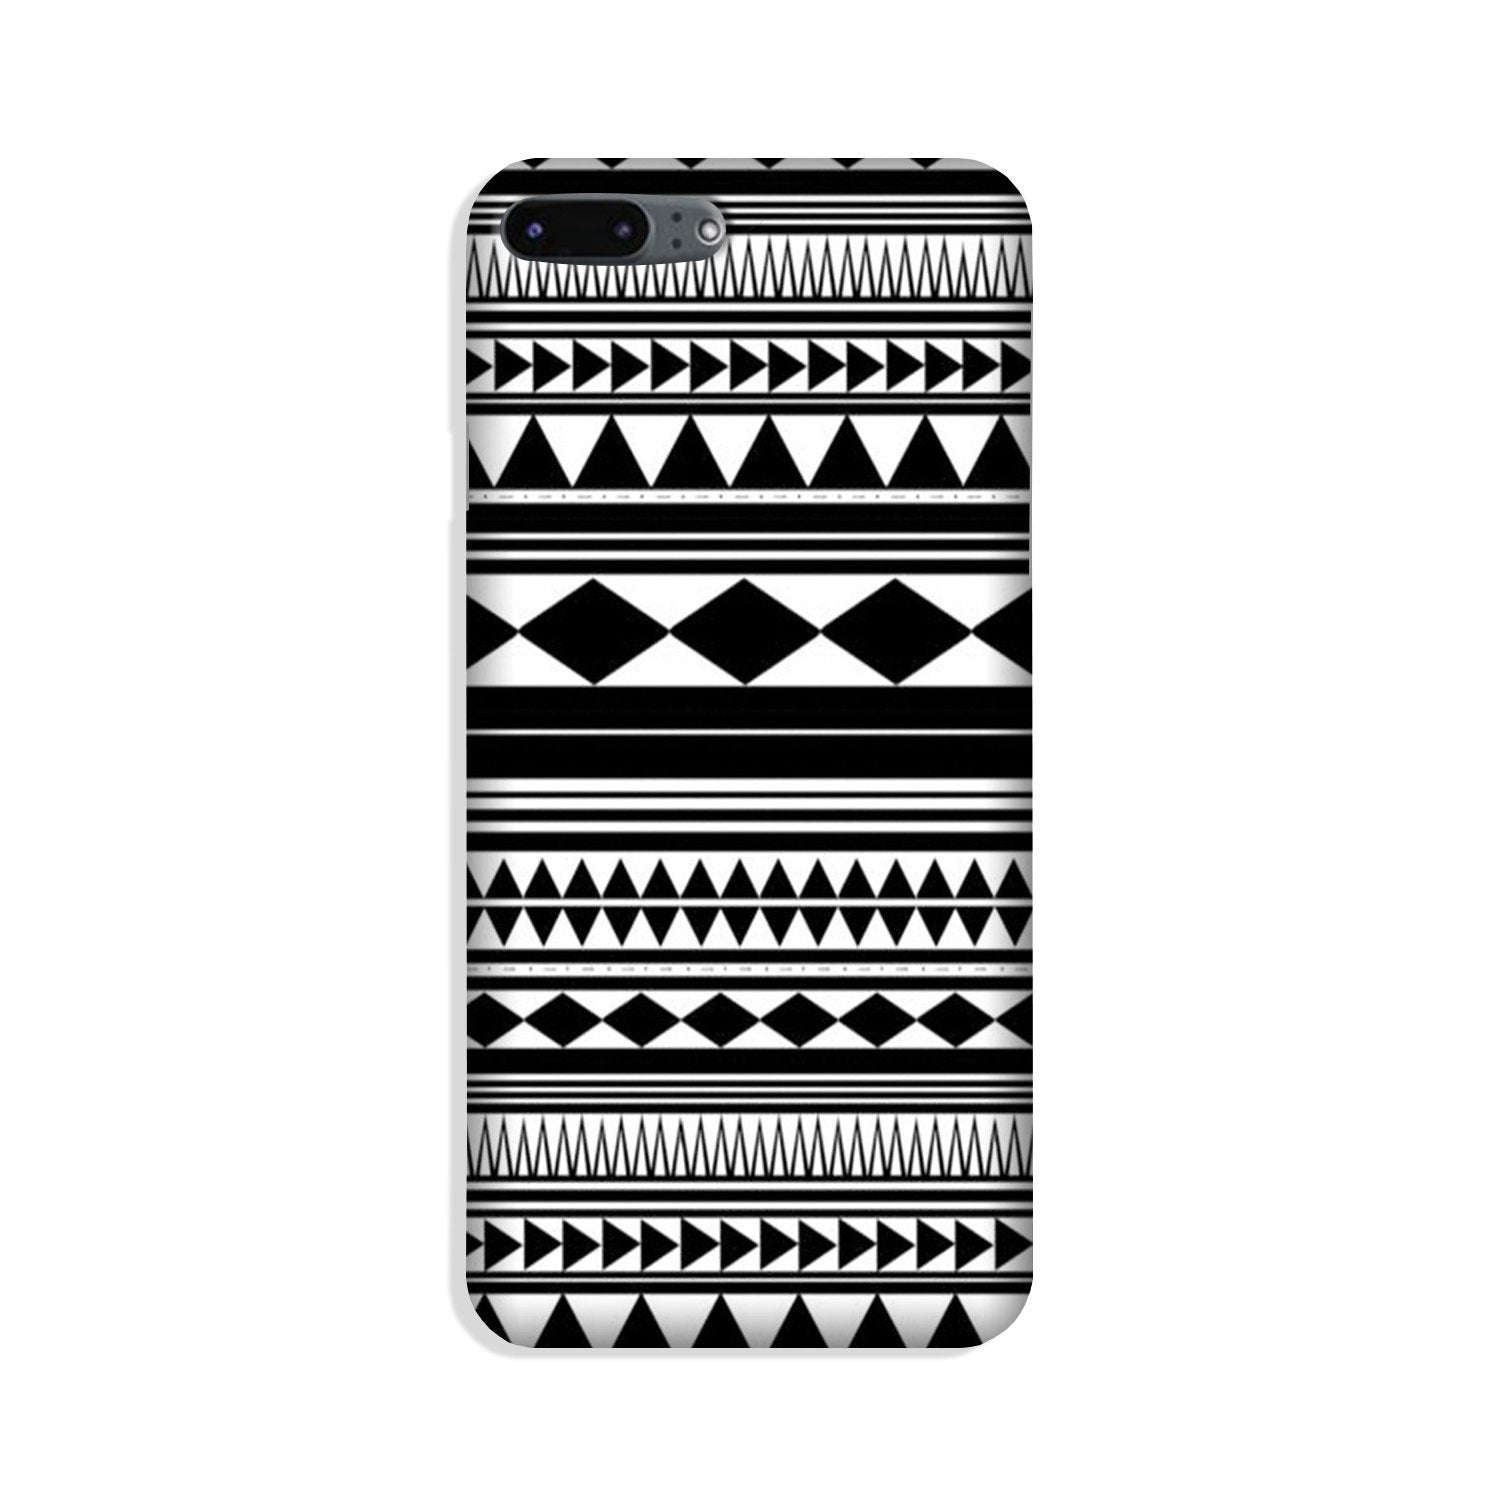 Black white Pattern Case for iPhone 8 Plus